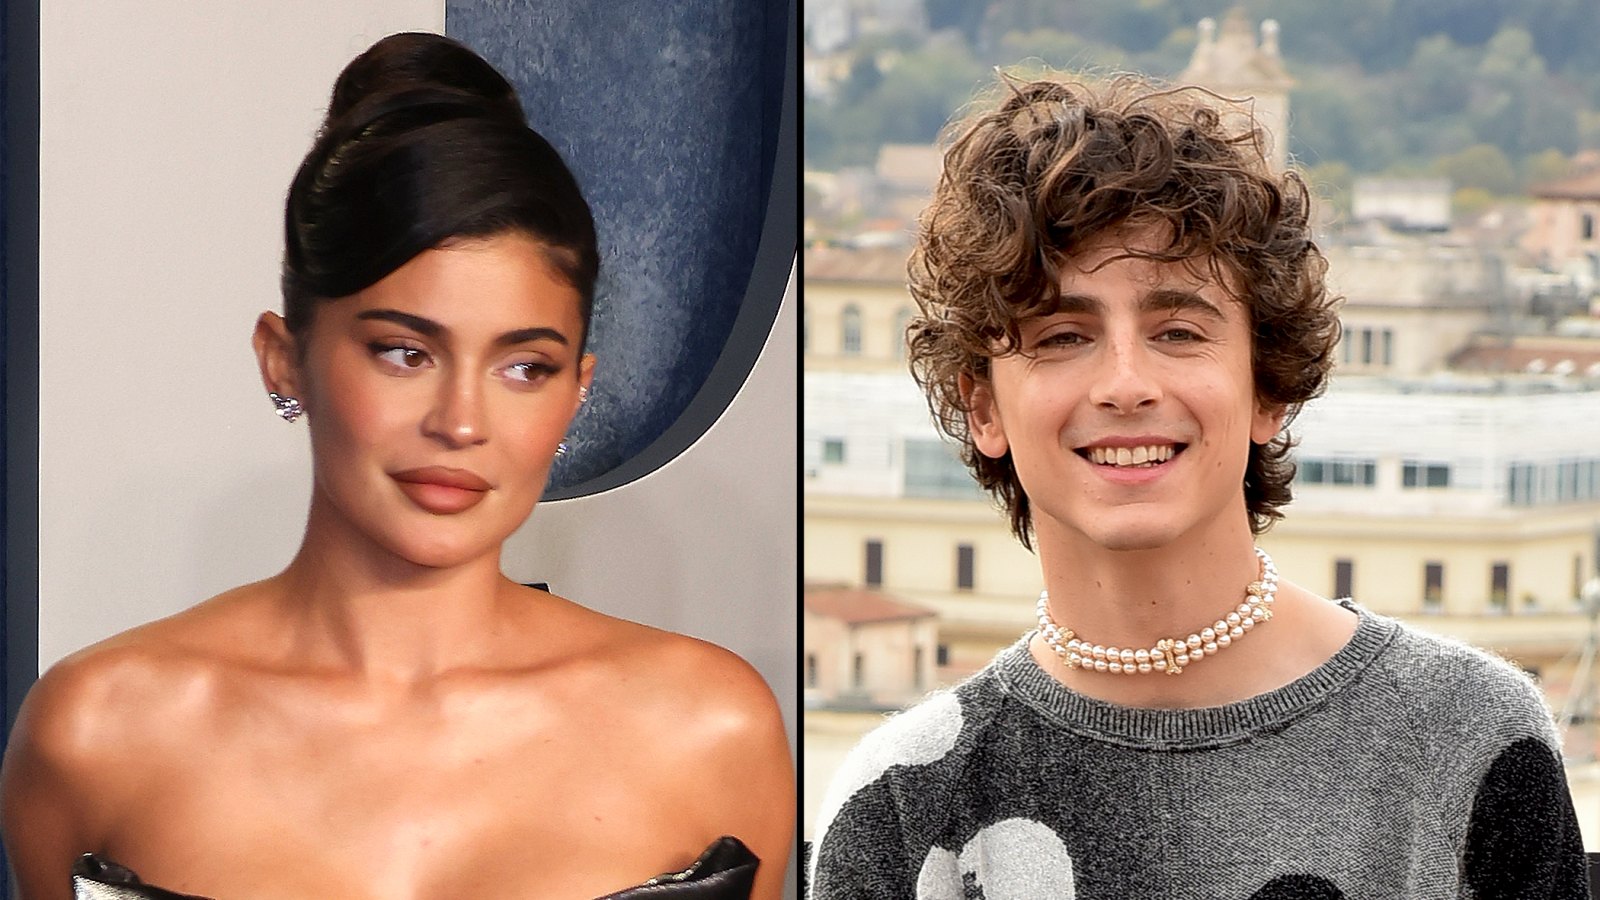 Who Is Timothee Chalamet? Kylie Jenner New Boo 